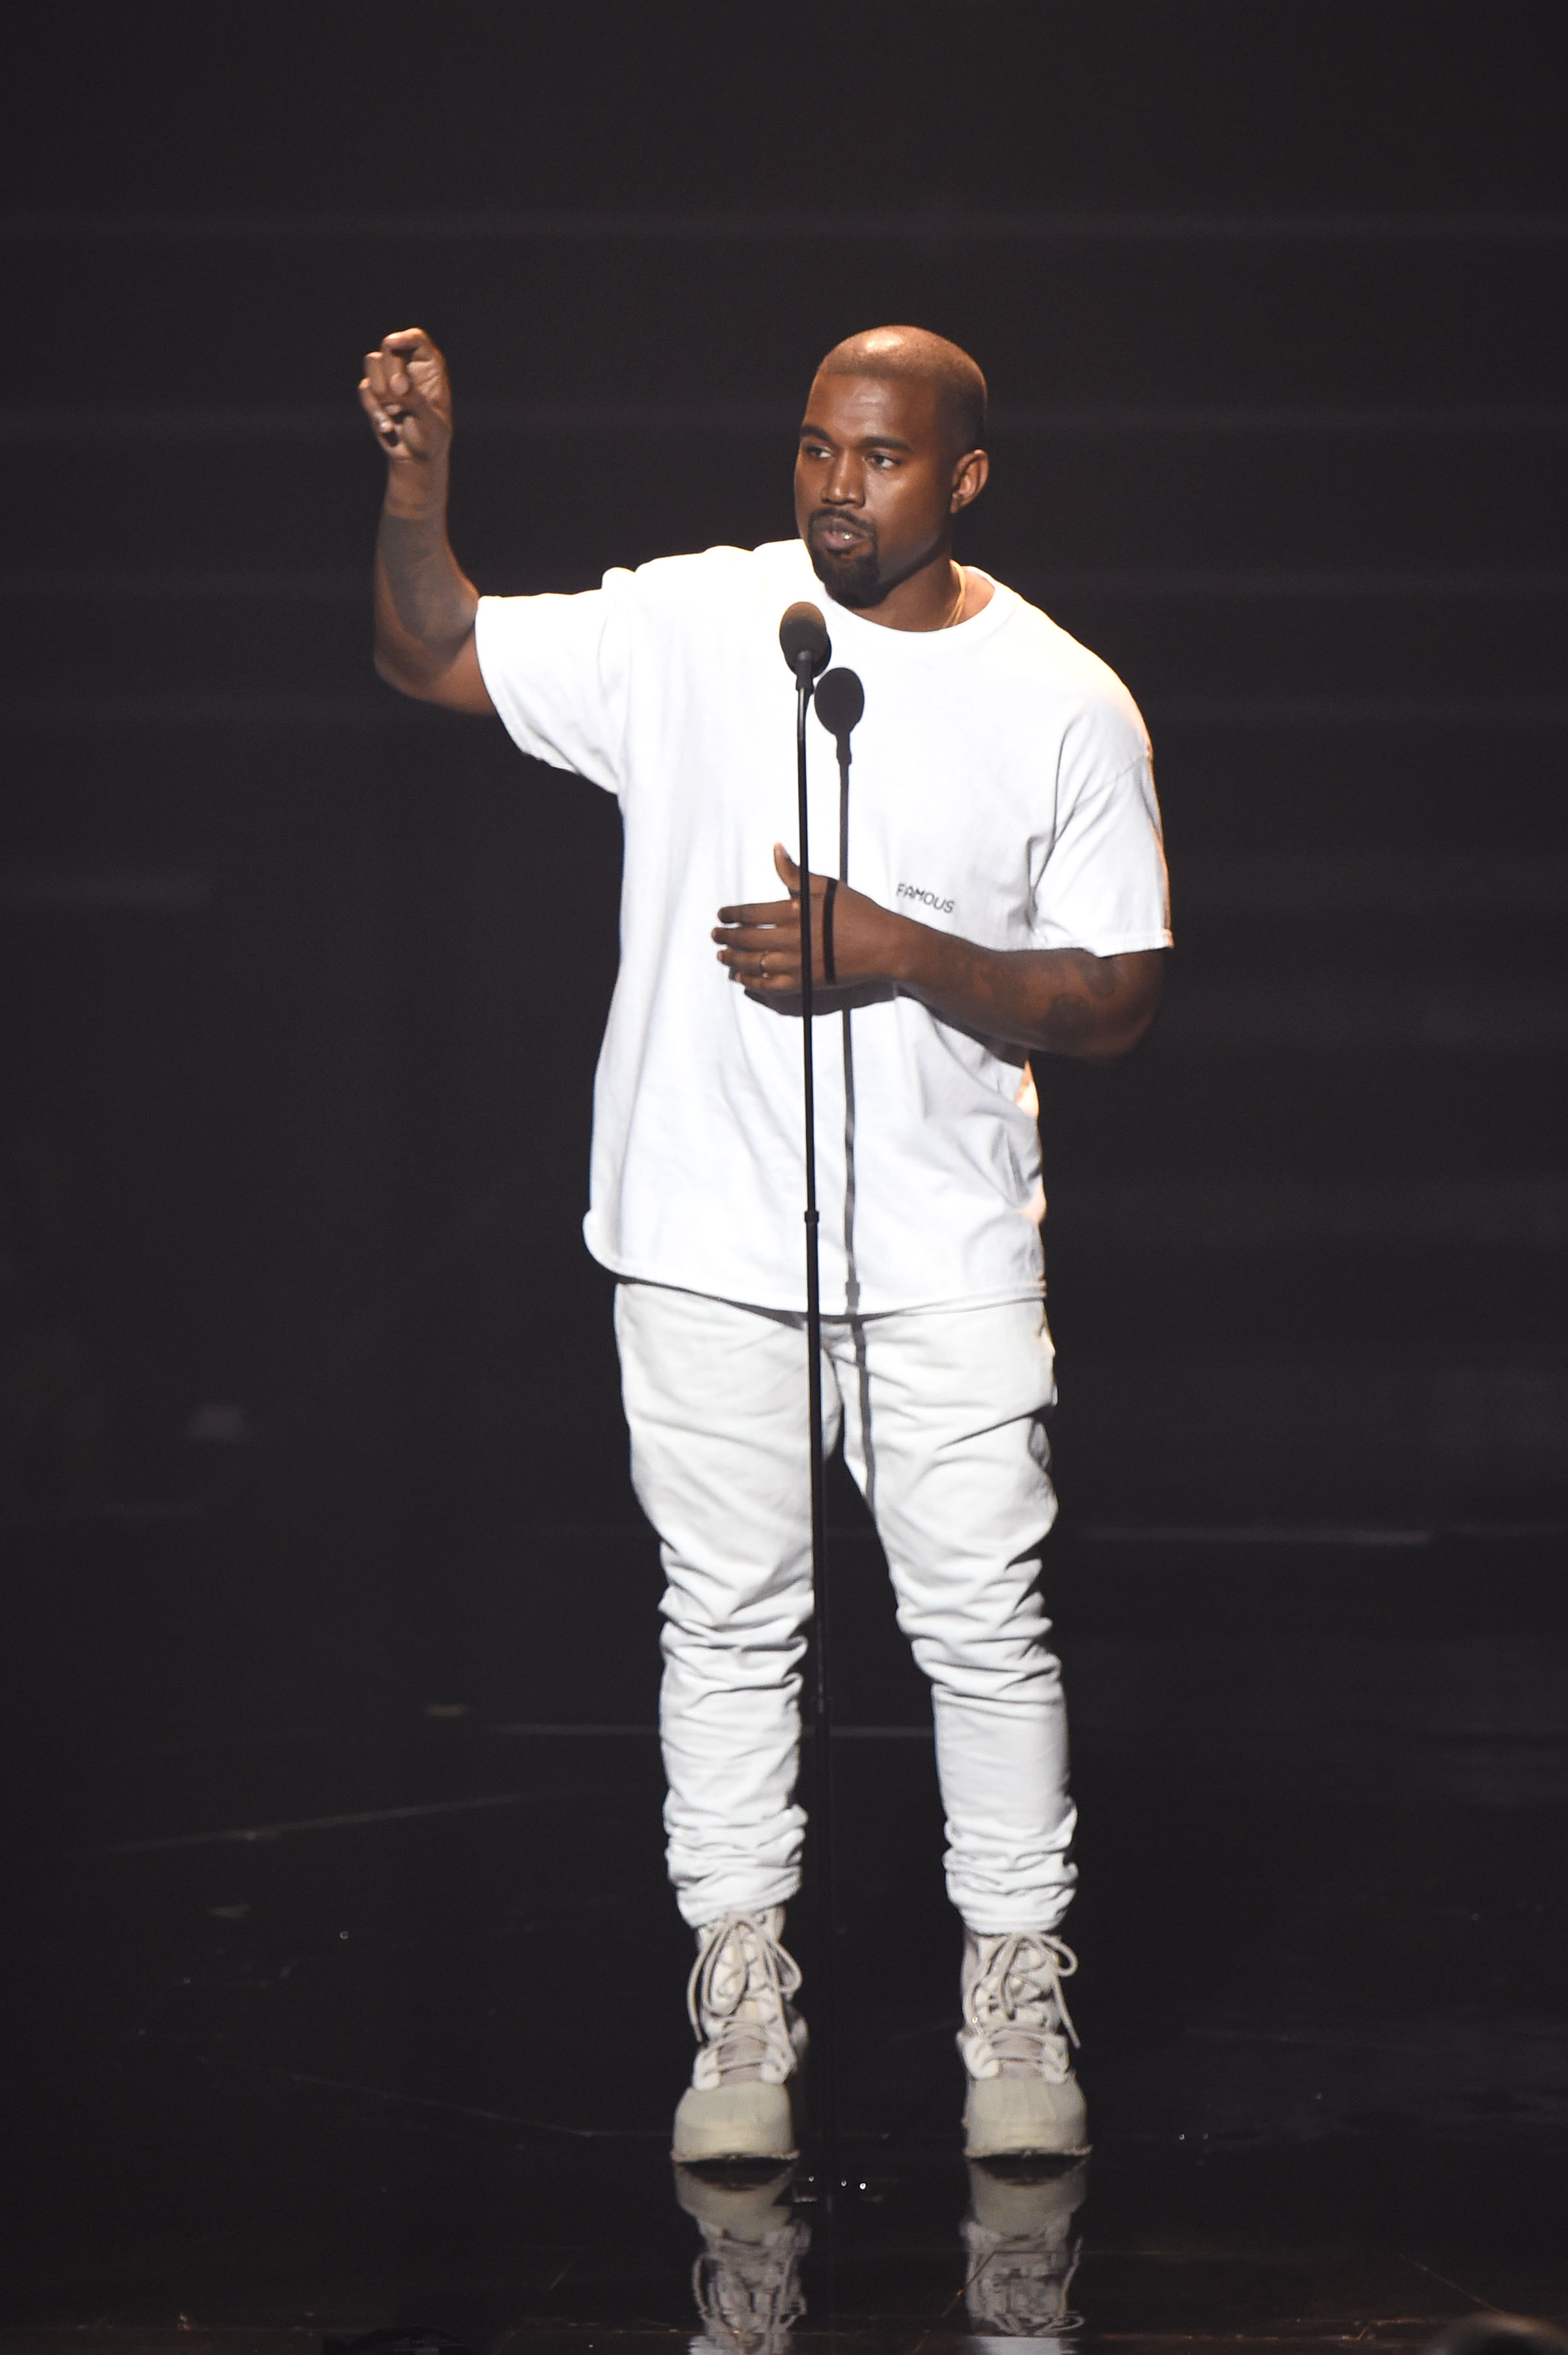 NEW YORK, NY - AUGUST 28: Kanye West performs onstage during the 2016 MTV Video Music Awards at Madison Square Garden on August 28, 2016 in New York City. Michael Loccisano/Getty Images/AFP